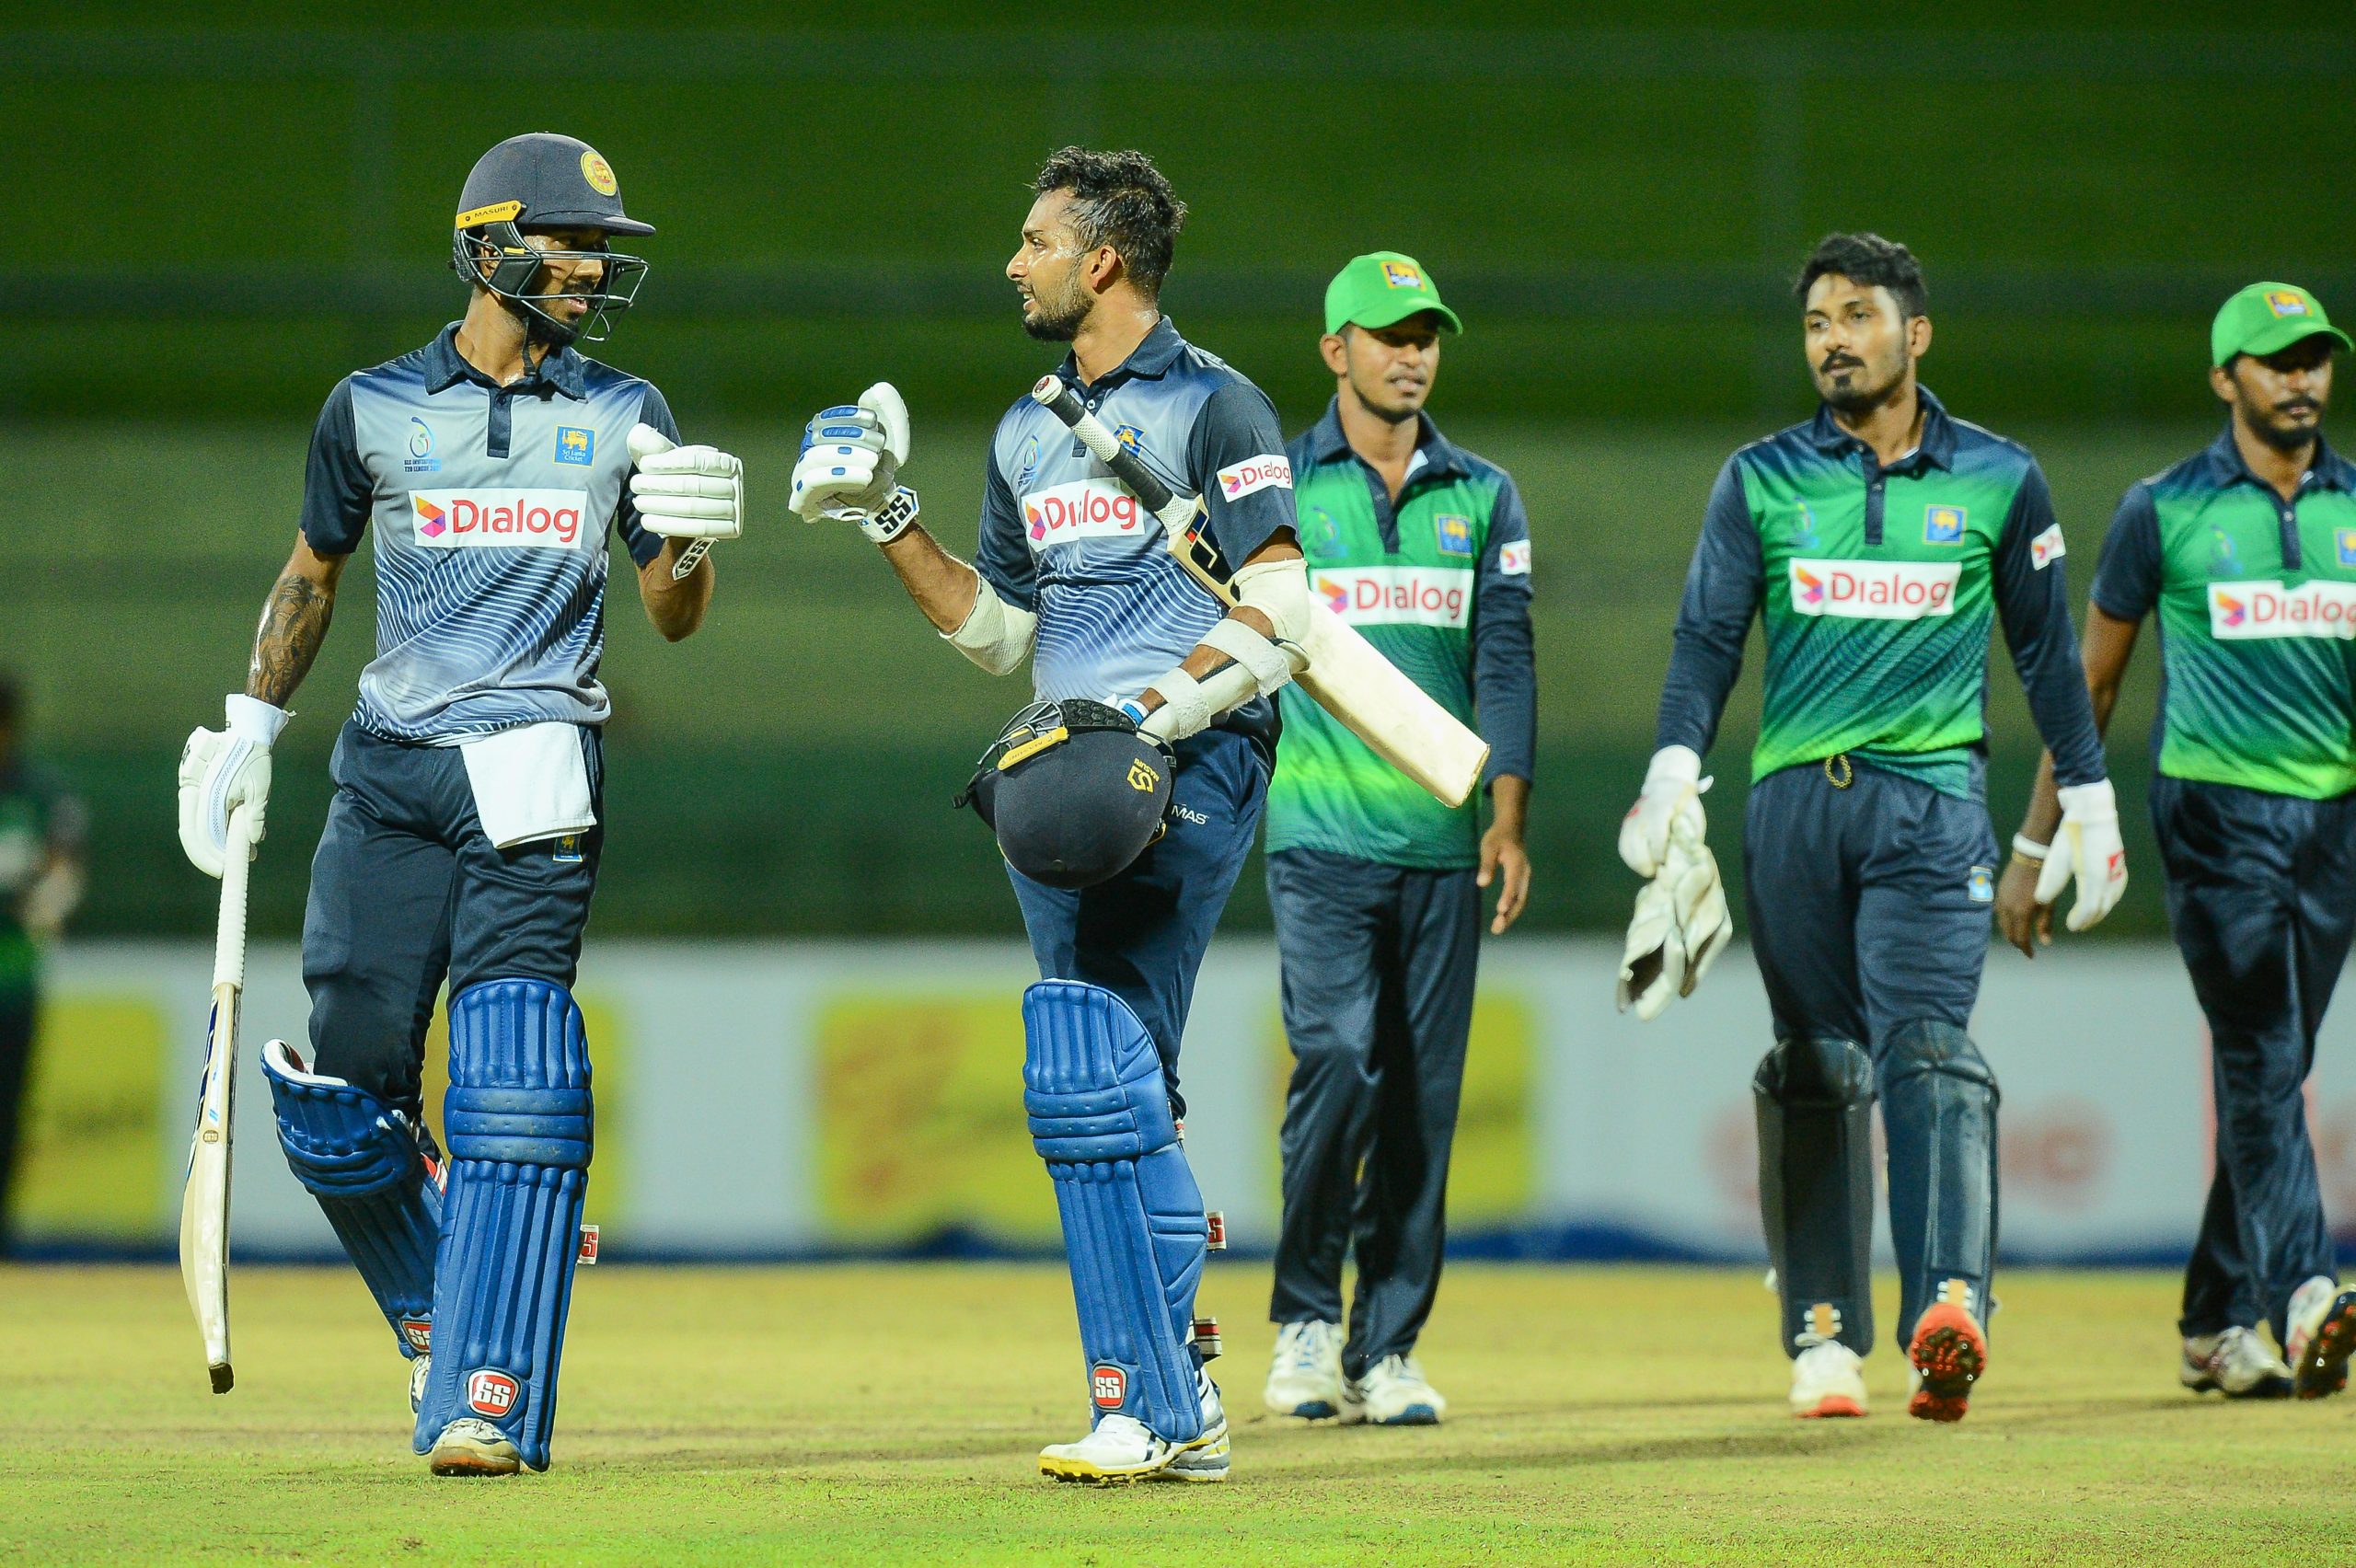 Chandimal clicks with another half-ton in Reds 6-wkt. win over Blues; Dasun Shanaka cameo 55 as Greys beat Greens by 4 runs